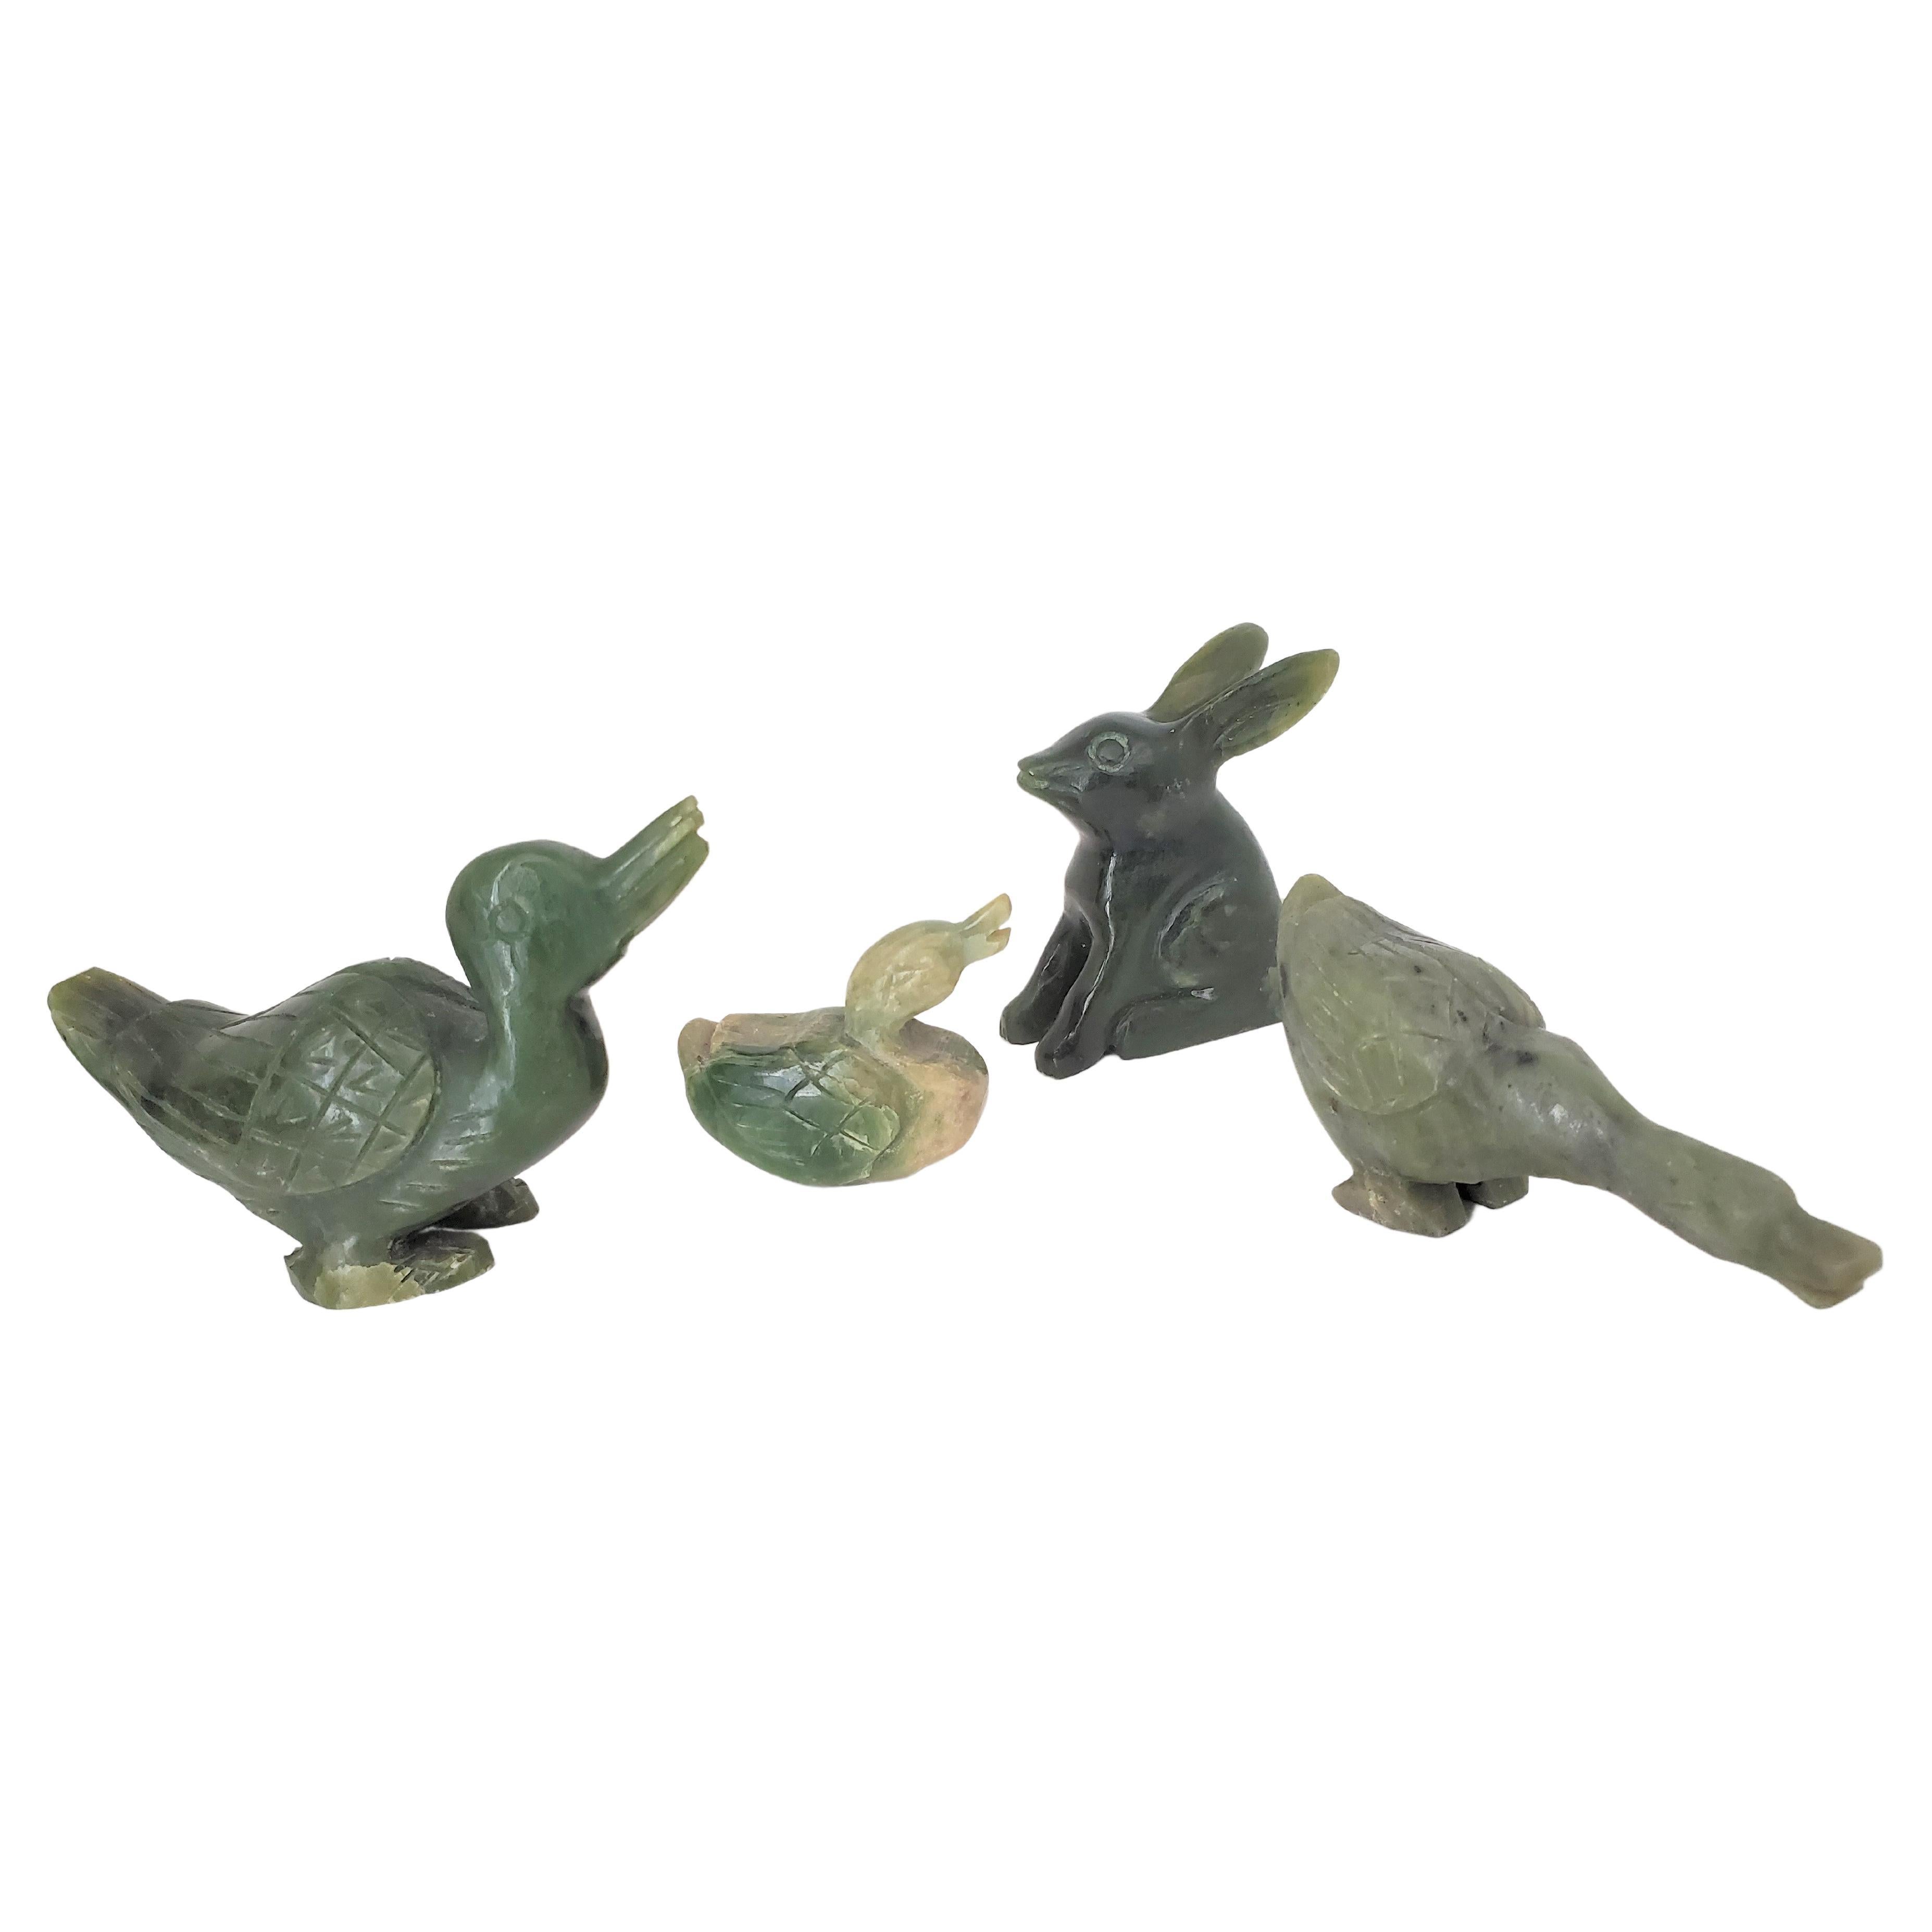 Natural Spinach Jade Duck and Rabbit Figures from Qing Dynasty